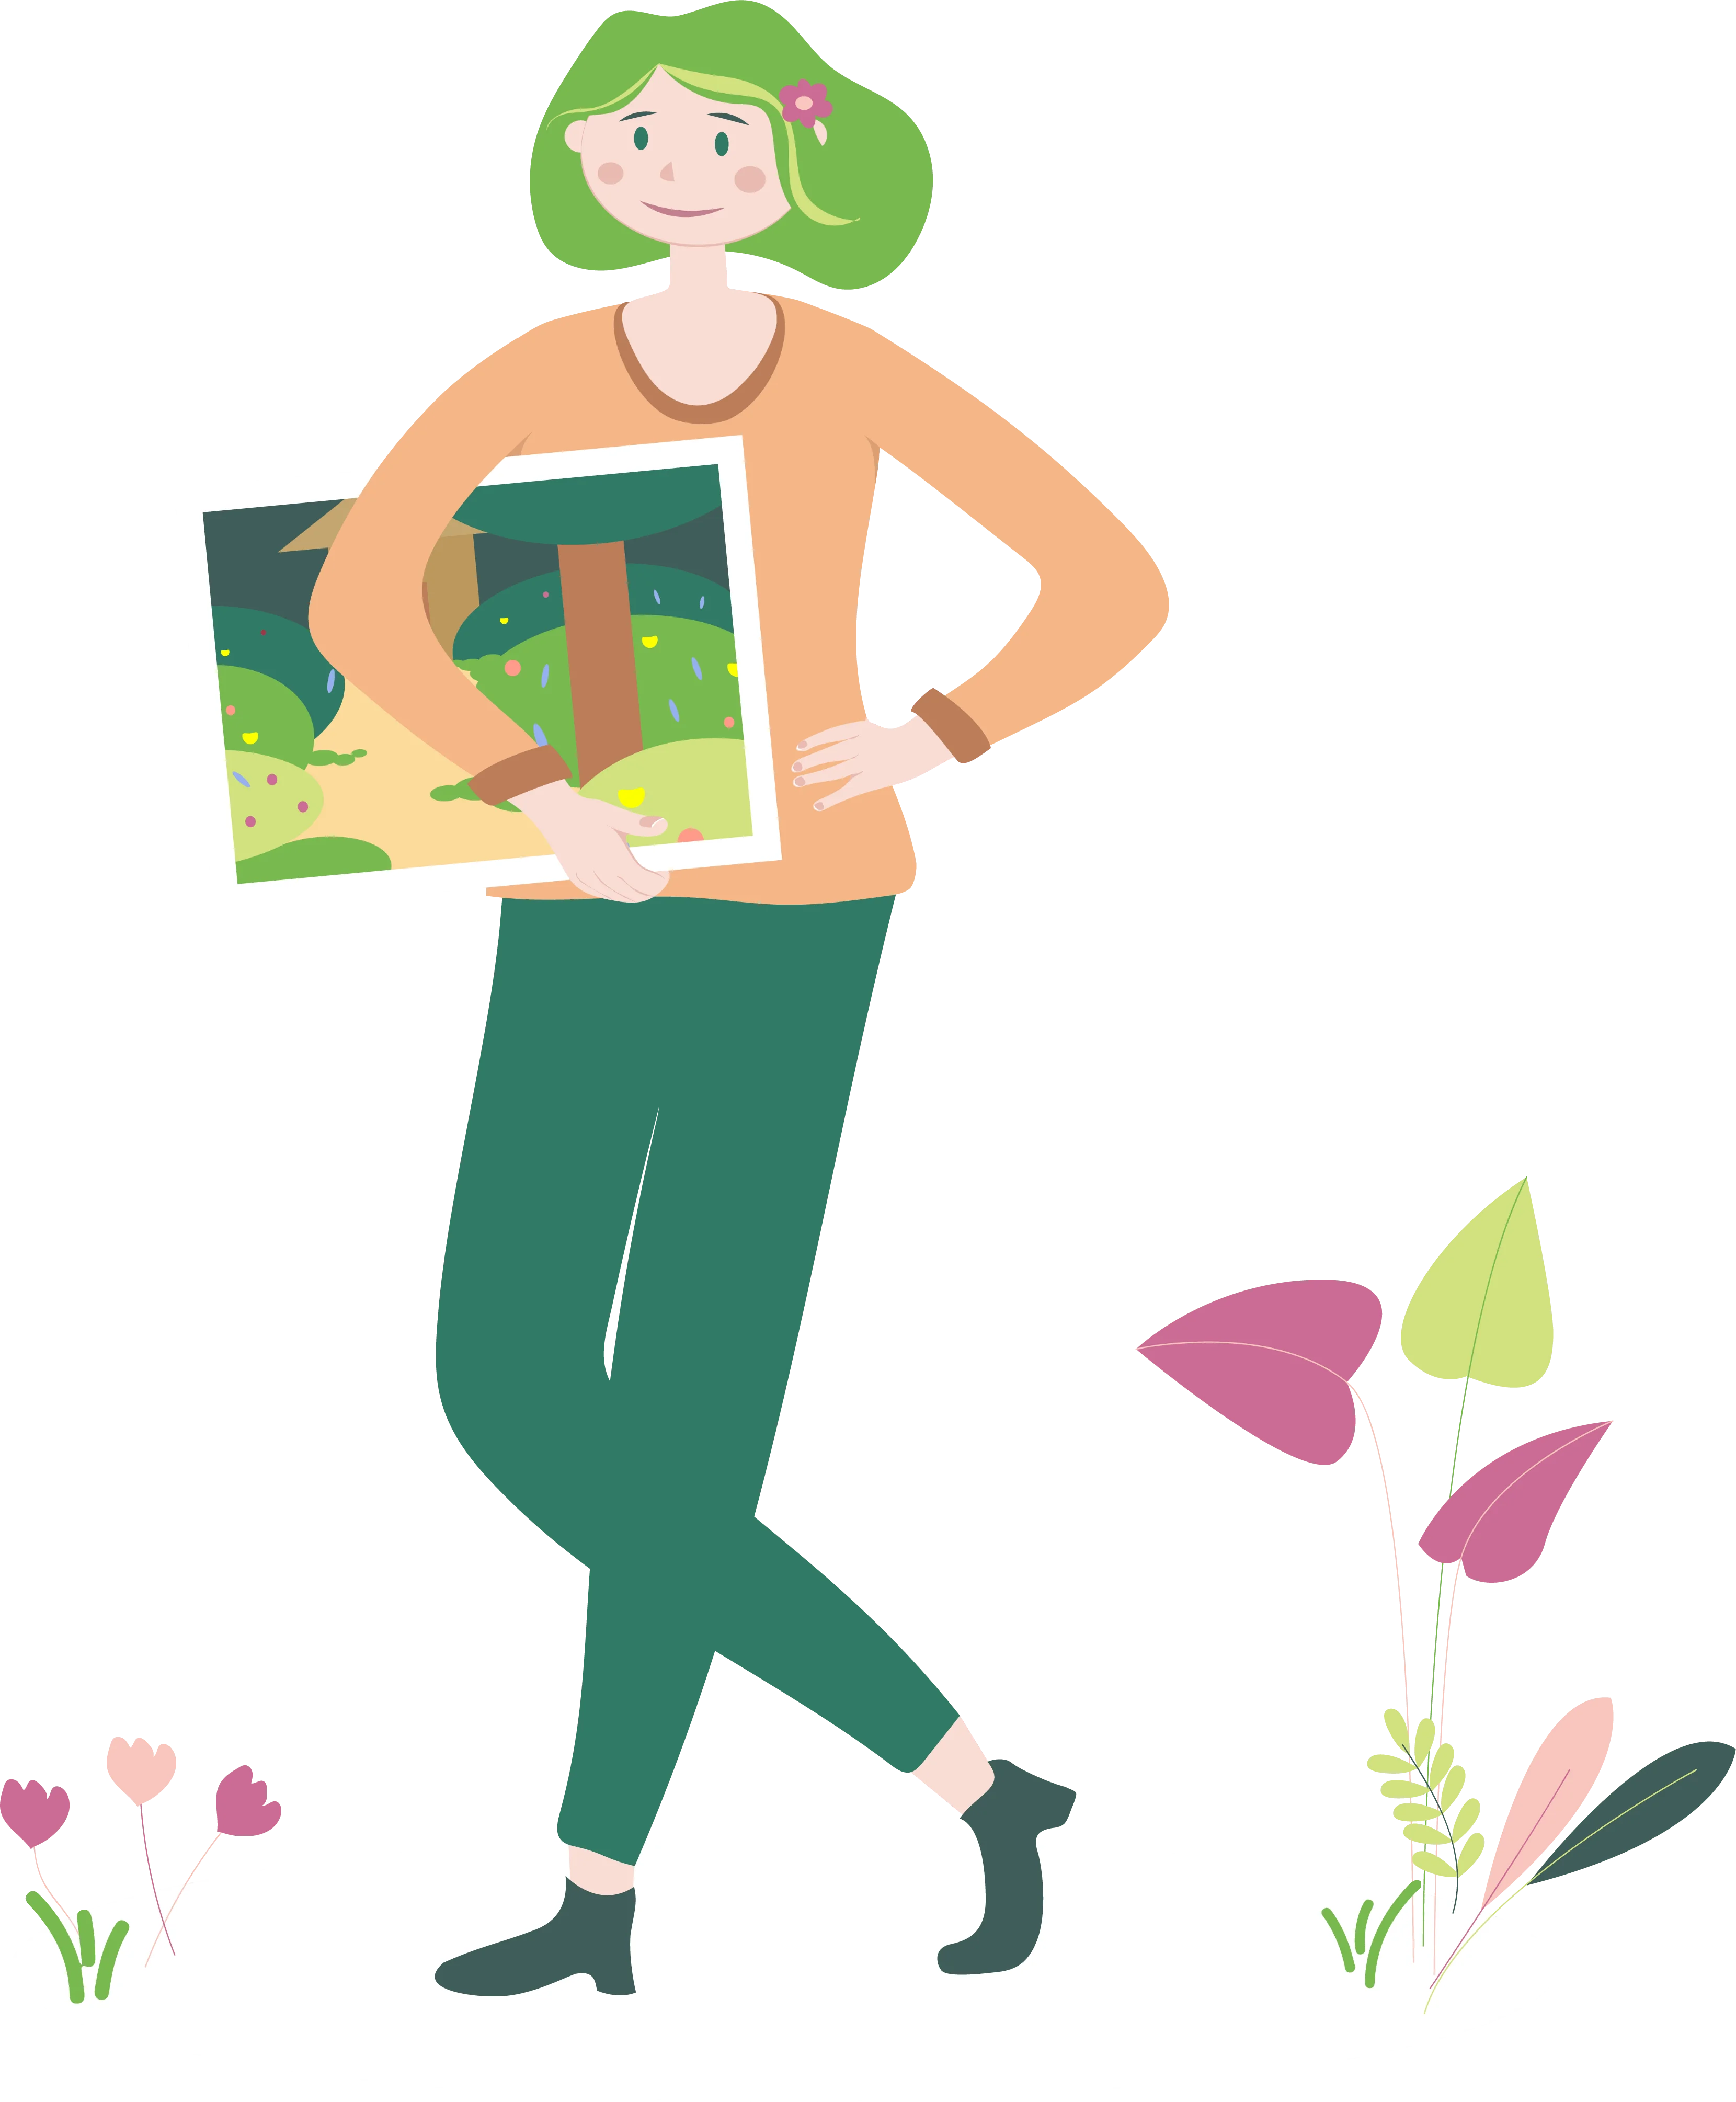 Illustration of a woman holding a garden painting